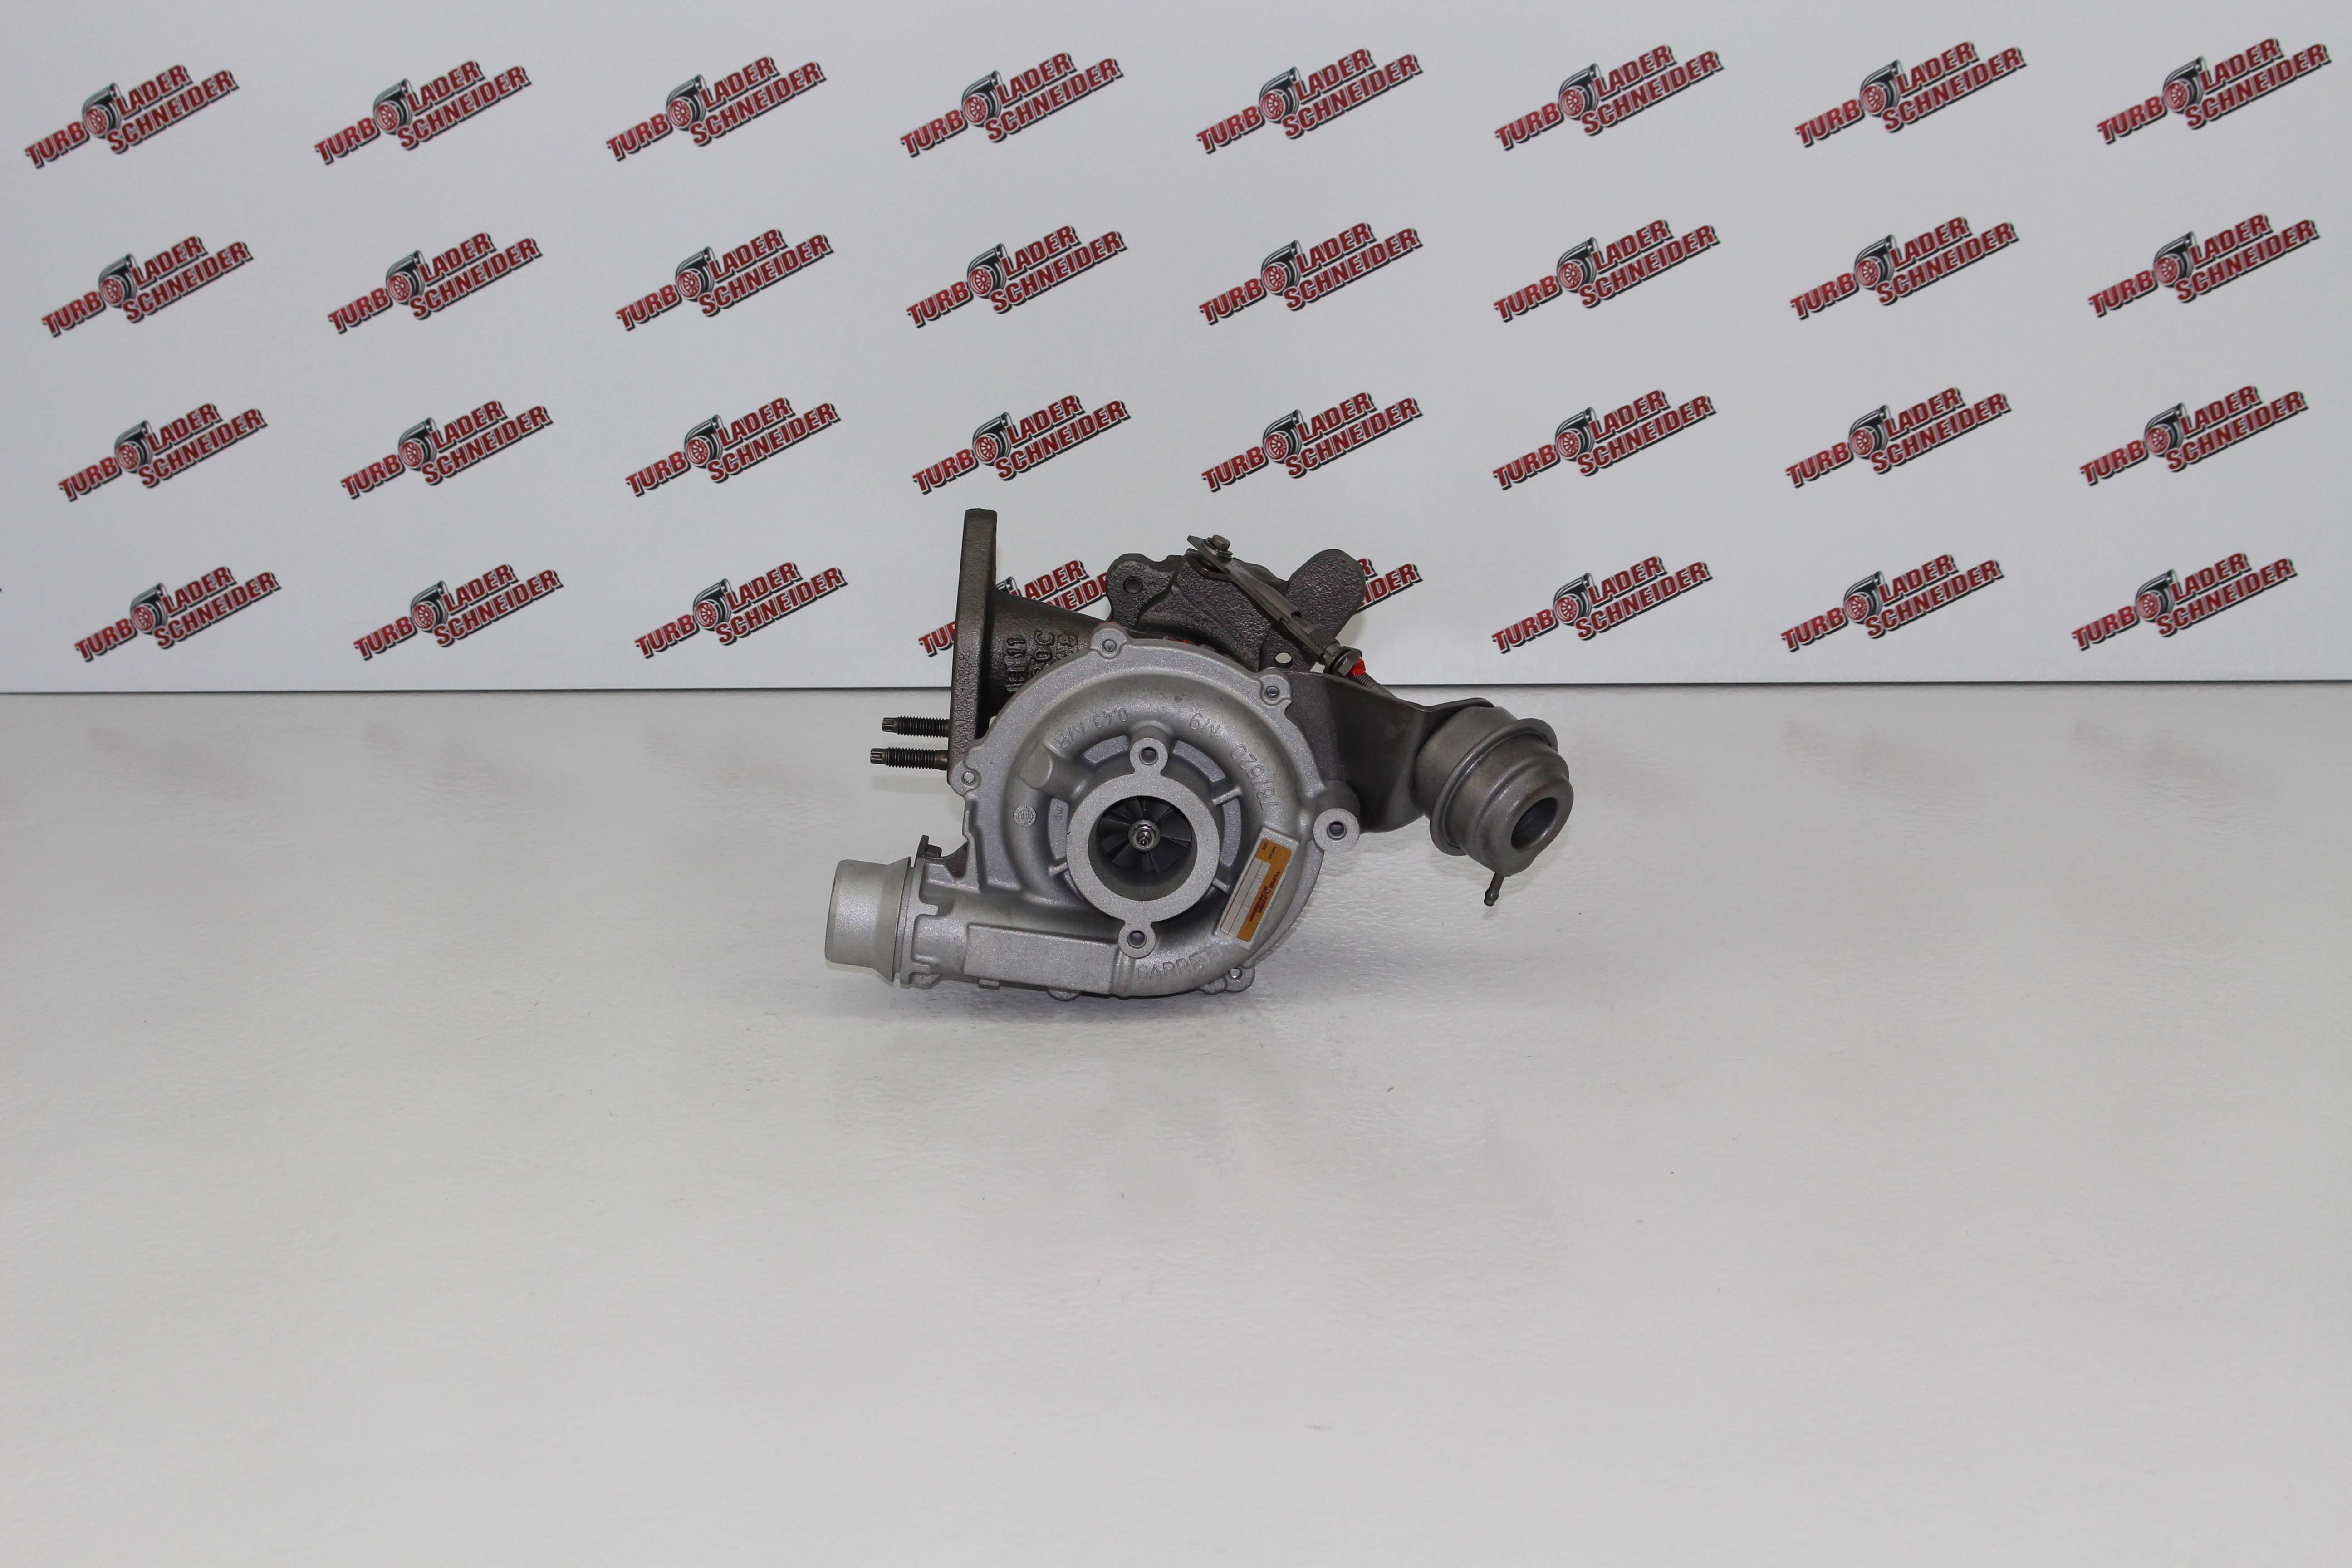 Turbolader Nissan/Opel/Renault 2.3 CDTI/dCi 100/125 74-92 Kw